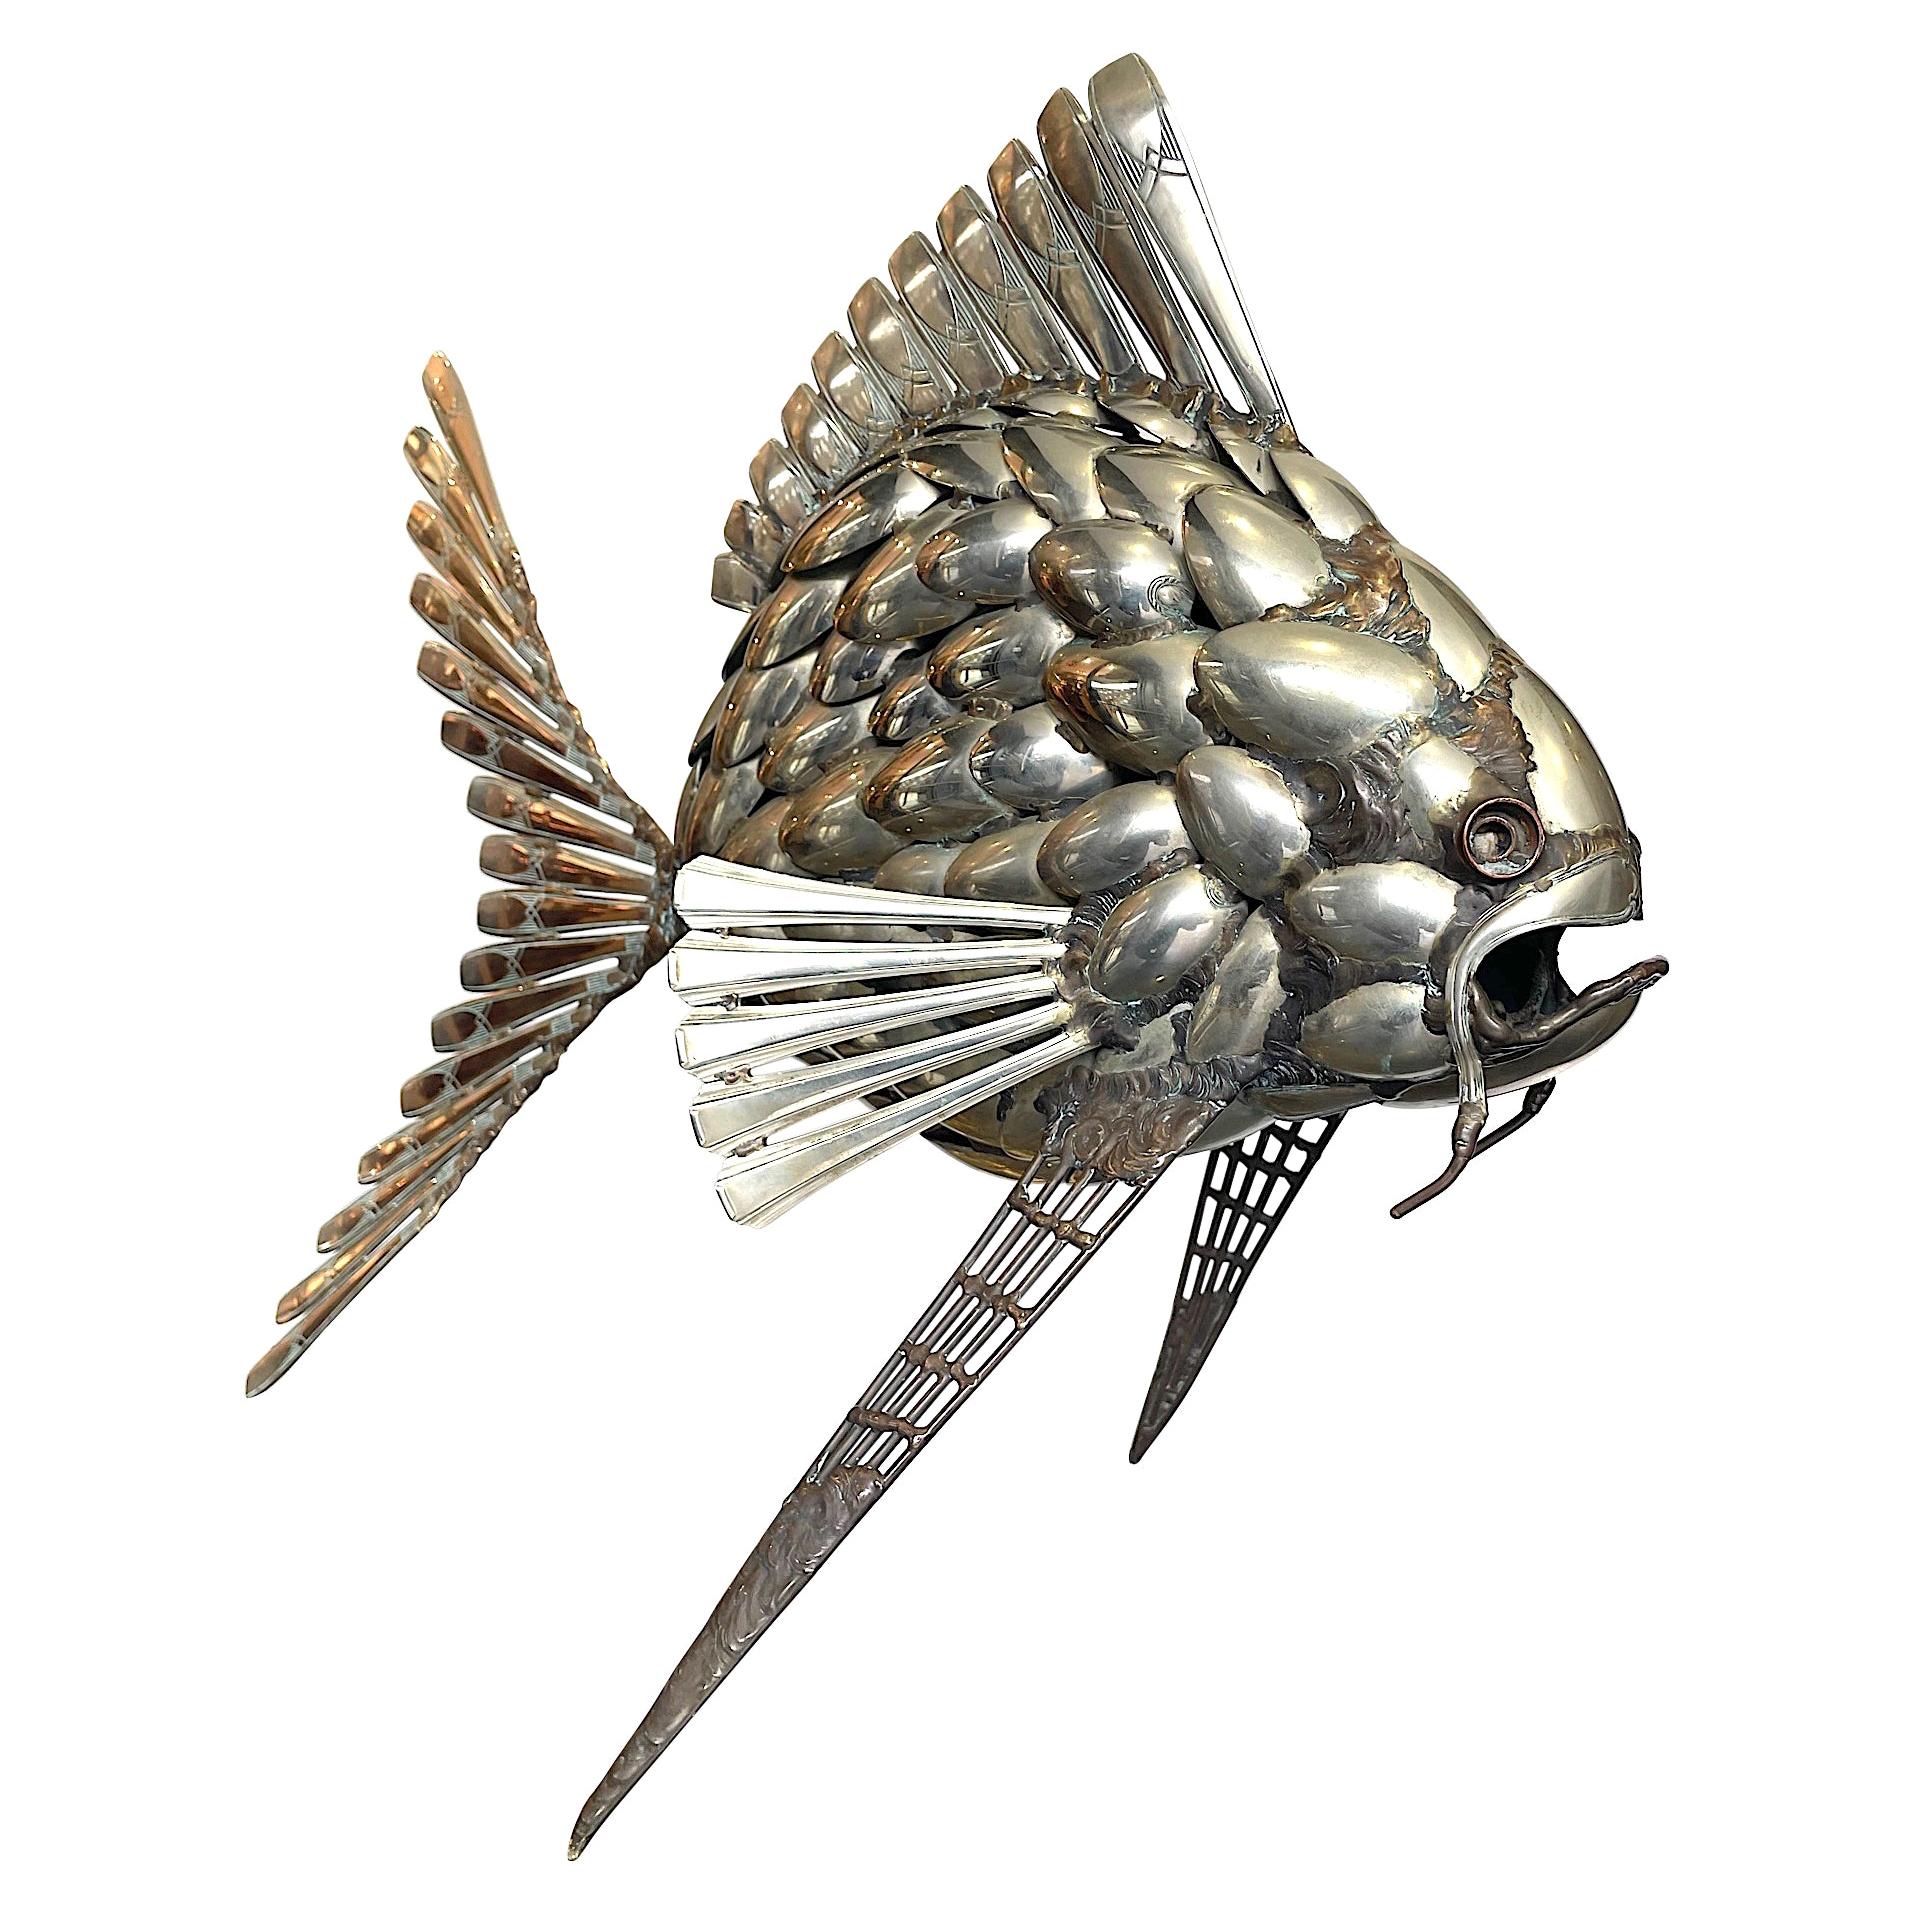 Fantastic Large 1950s Sculpture of a Fish Made from Silver Plated Spoons